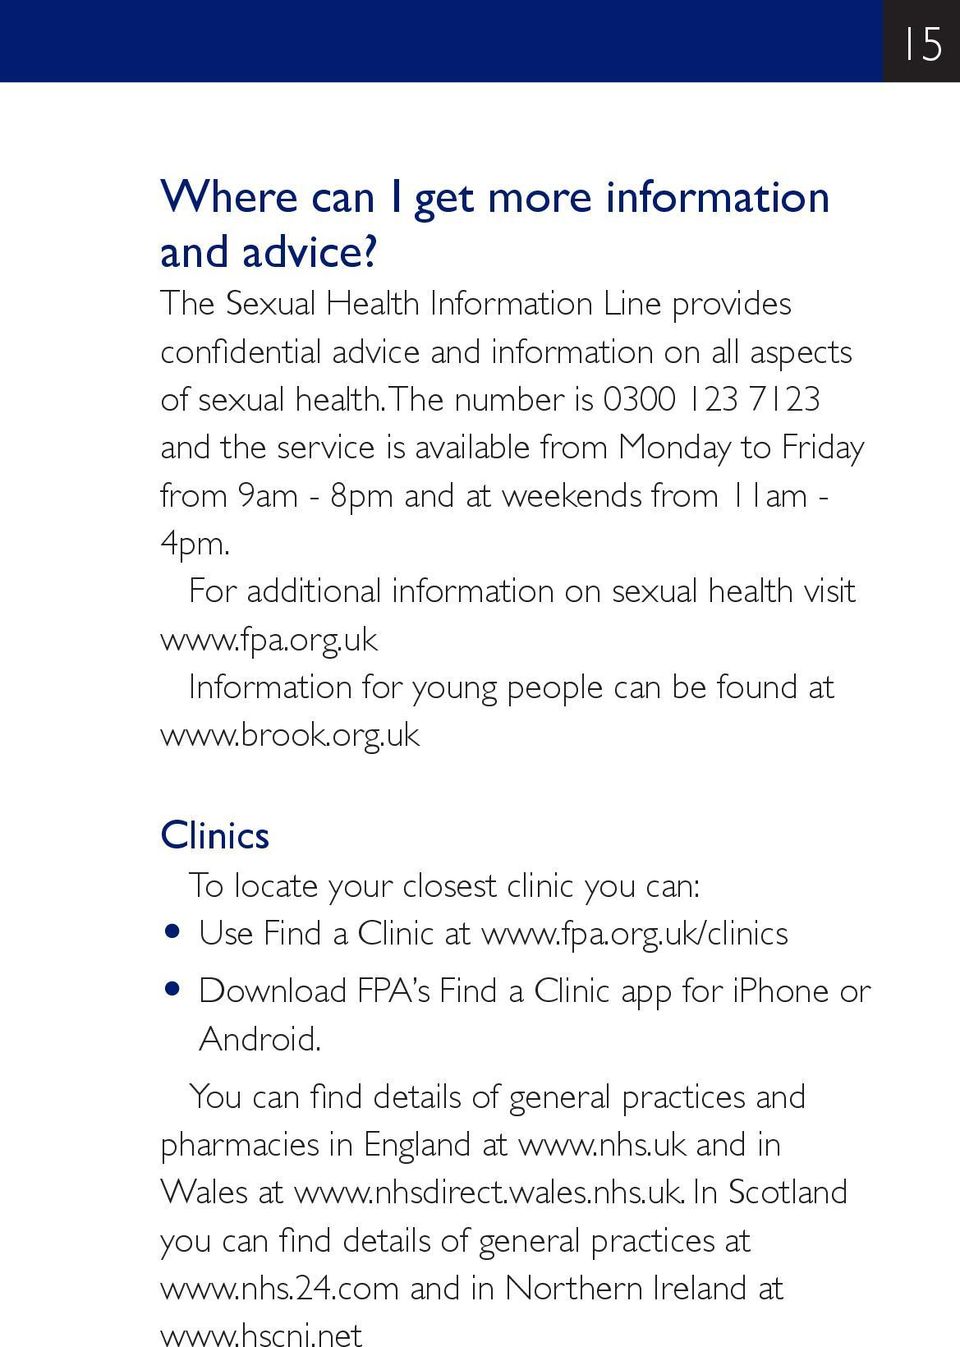 uk Information for young people can be found at www.brook.org.uk Clinics To locate your closest clinic you can: O Use Find a Clinic at www.fpa.org.uk/clinics O Download FPA s Find a Clinic app for iphone or Android.